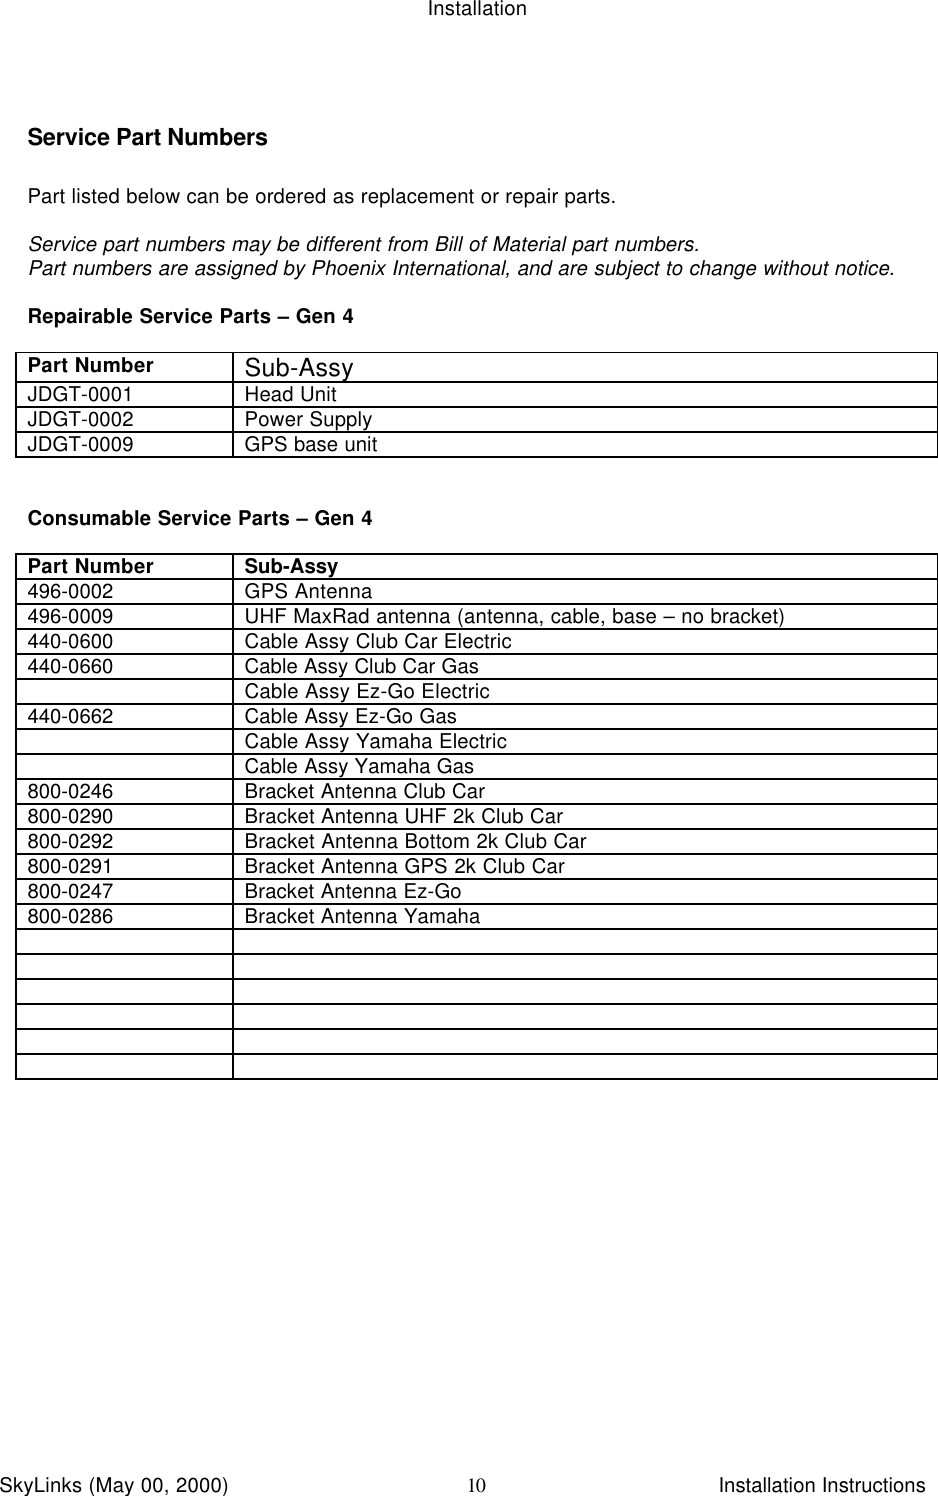 InstallationSkyLinks (May 00, 2000)                        Installation Instructions10Service Part NumbersPart listed below can be ordered as replacement or repair parts.Service part numbers may be different from Bill of Material part numbers.Part numbers are assigned by Phoenix International, and are subject to change without notice.Repairable Service Parts – Gen 4Part Number Sub-AssyJDGT-0001 Head UnitJDGT-0002 Power SupplyJDGT-0009 GPS base unitConsumable Service Parts – Gen 4Part Number Sub-Assy496-0002 GPS Antenna496-0009 UHF MaxRad antenna (antenna, cable, base – no bracket)440-0600 Cable Assy Club Car Electric440-0660 Cable Assy Club Car GasCable Assy Ez-Go Electric440-0662 Cable Assy Ez-Go GasCable Assy Yamaha ElectricCable Assy Yamaha Gas800-0246 Bracket Antenna Club Car800-0290 Bracket Antenna UHF 2k Club Car800-0292 Bracket Antenna Bottom 2k Club Car800-0291 Bracket Antenna GPS 2k Club Car800-0247 Bracket Antenna Ez-Go800-0286 Bracket Antenna Yamaha